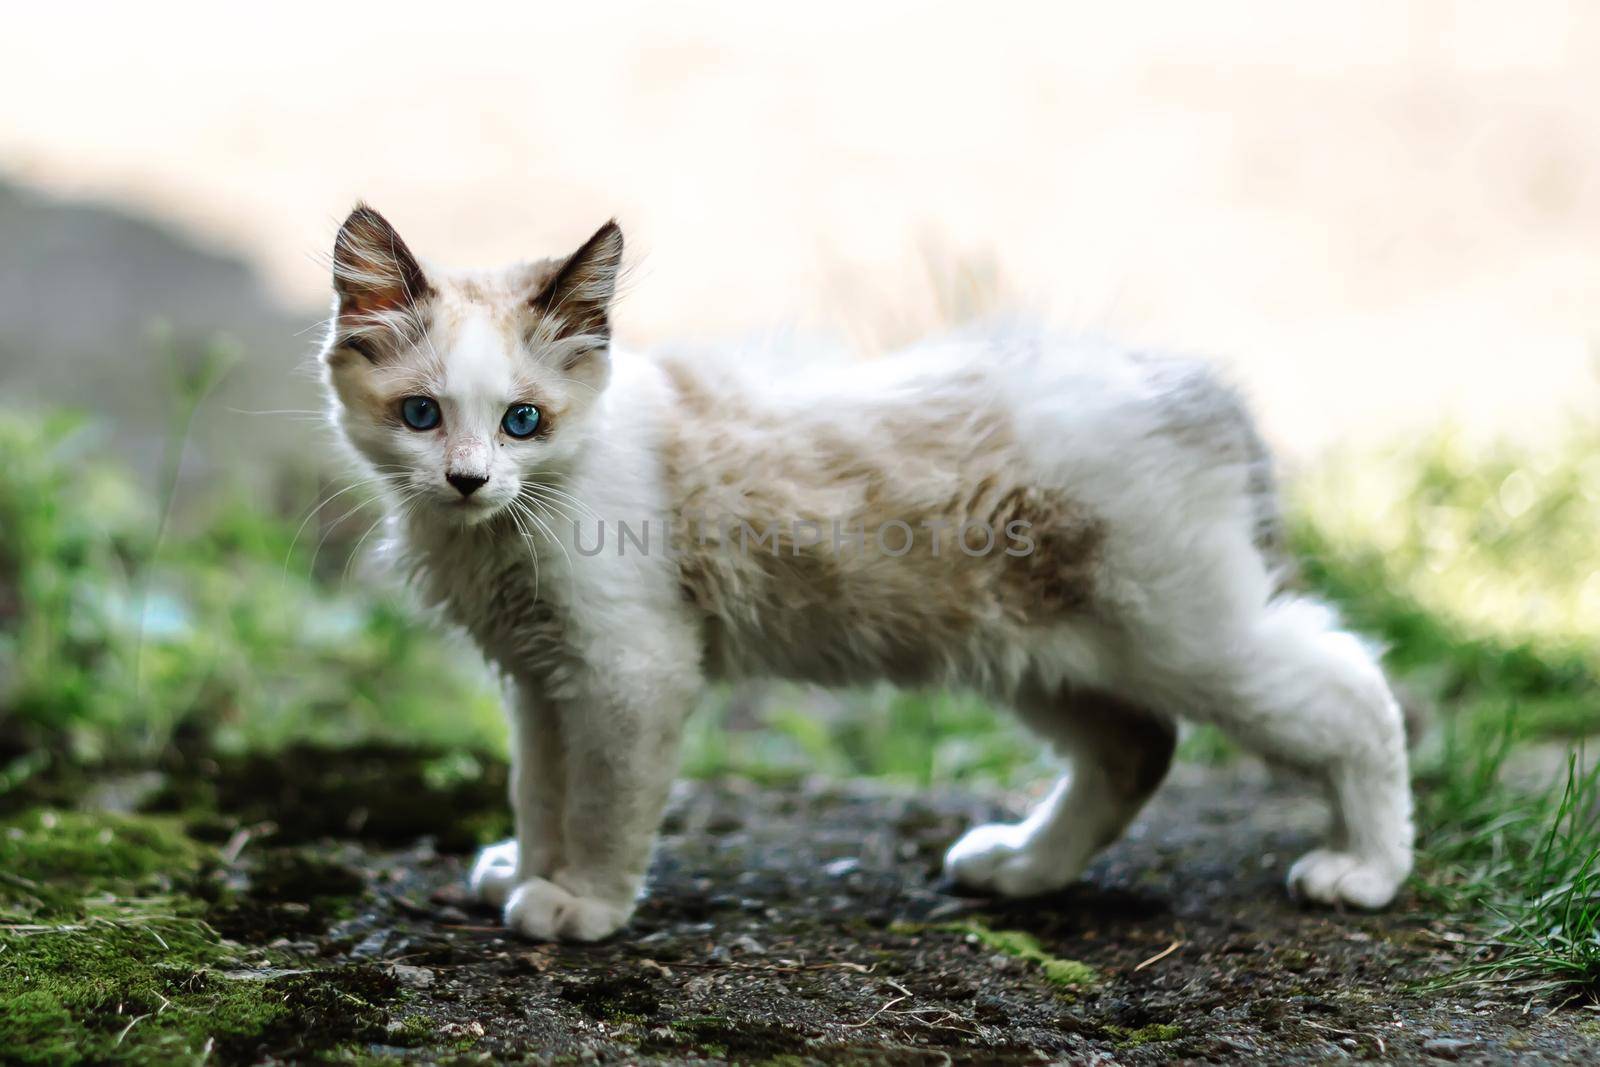 Homeless grimy little white kitten portrait. A beautiful cat with blue eyes. Animals are homeless. Small depth of field.